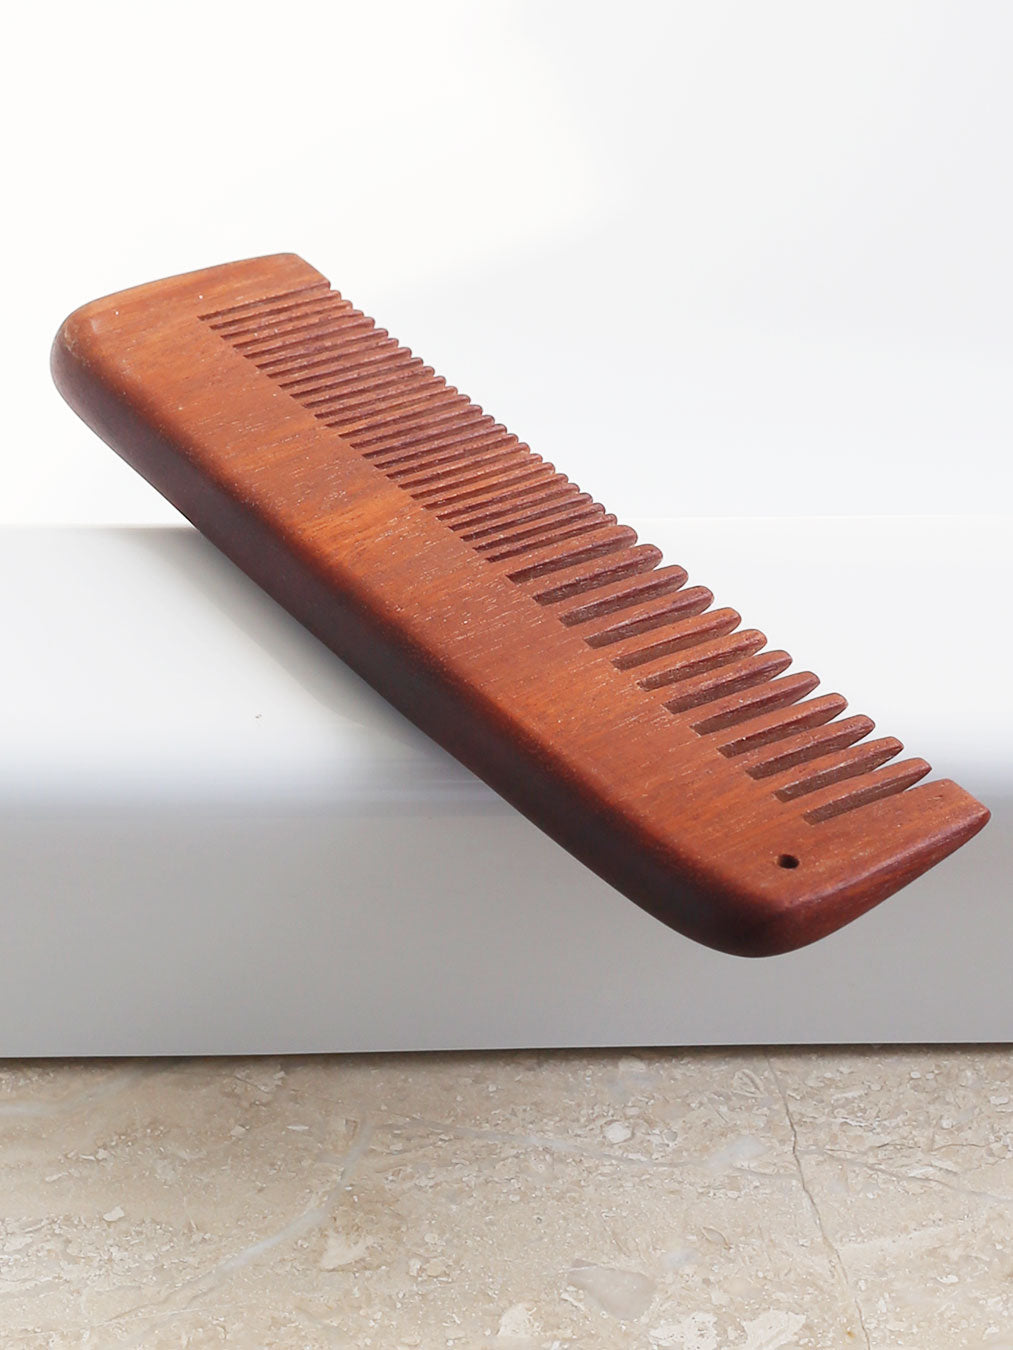 Solid wooden combs made from the beech tree.